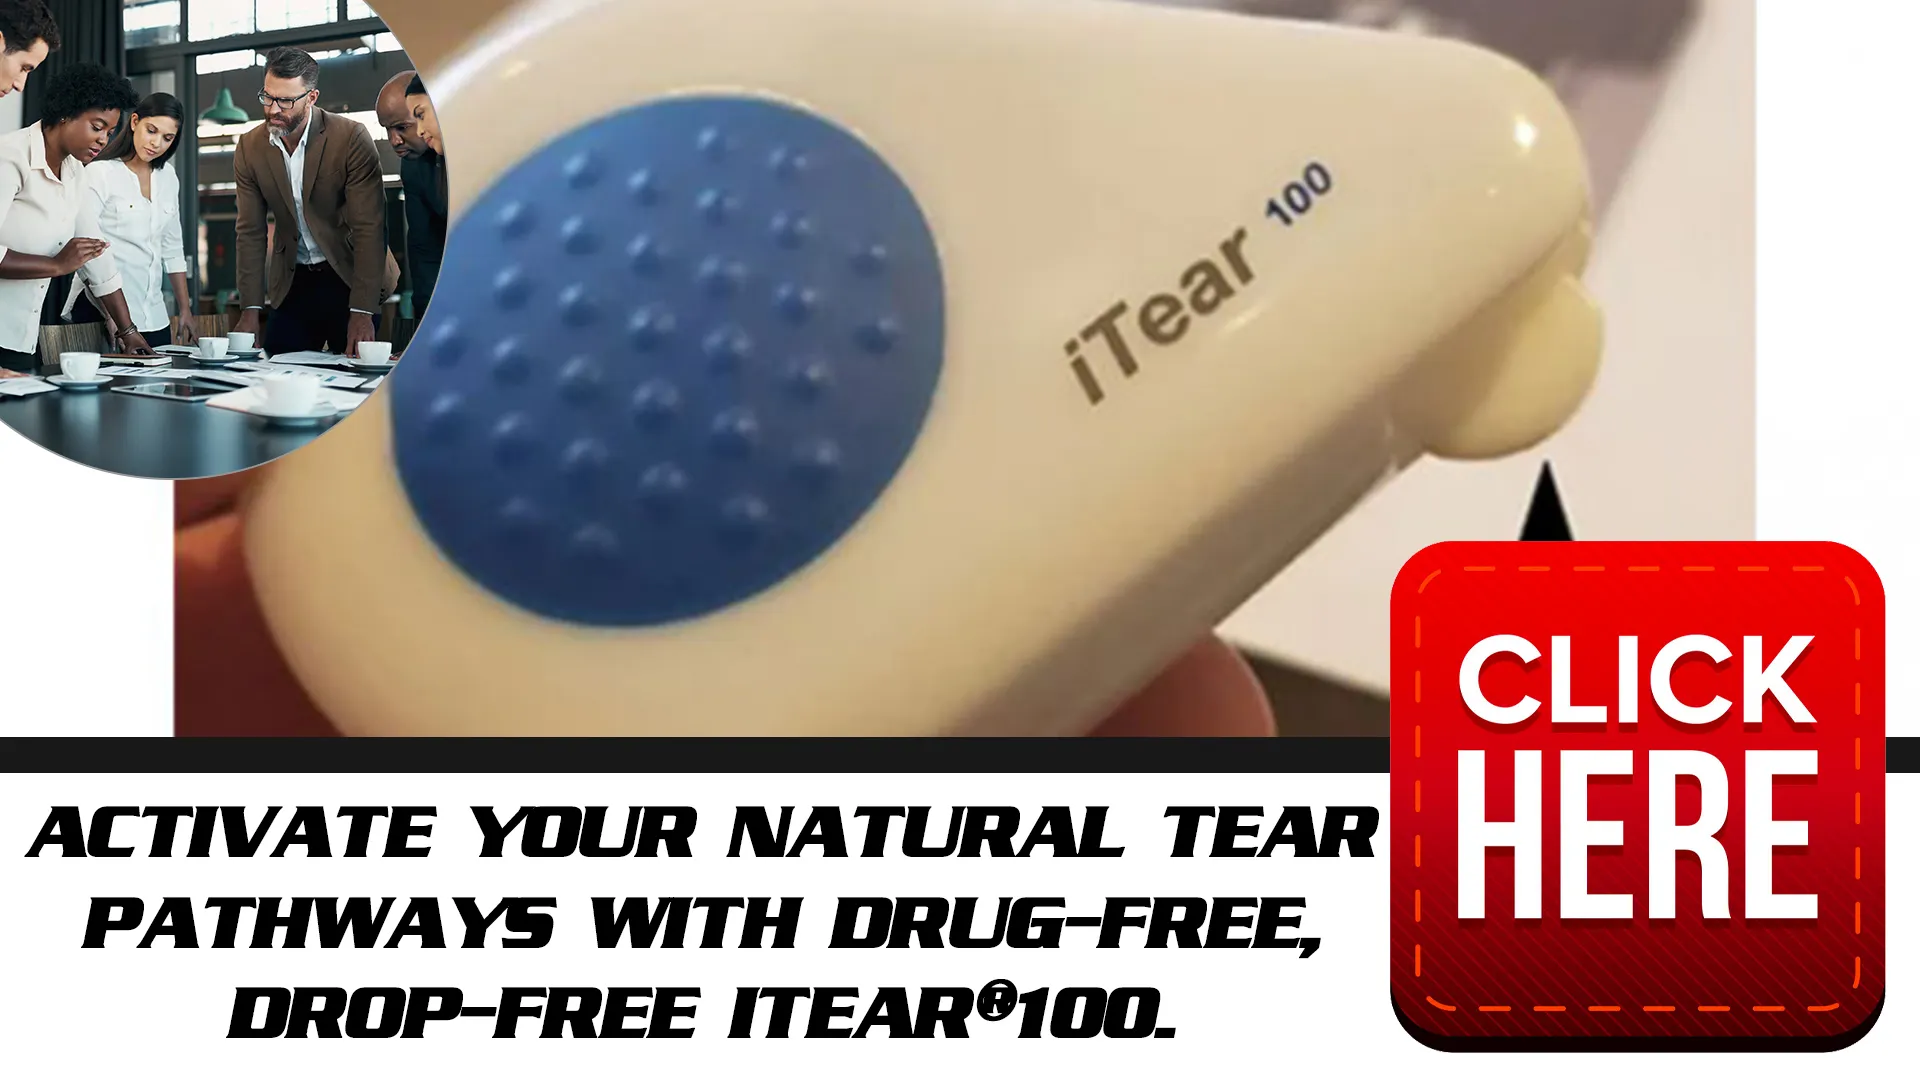 Introducing the Revolutionary iTEAR100 Device